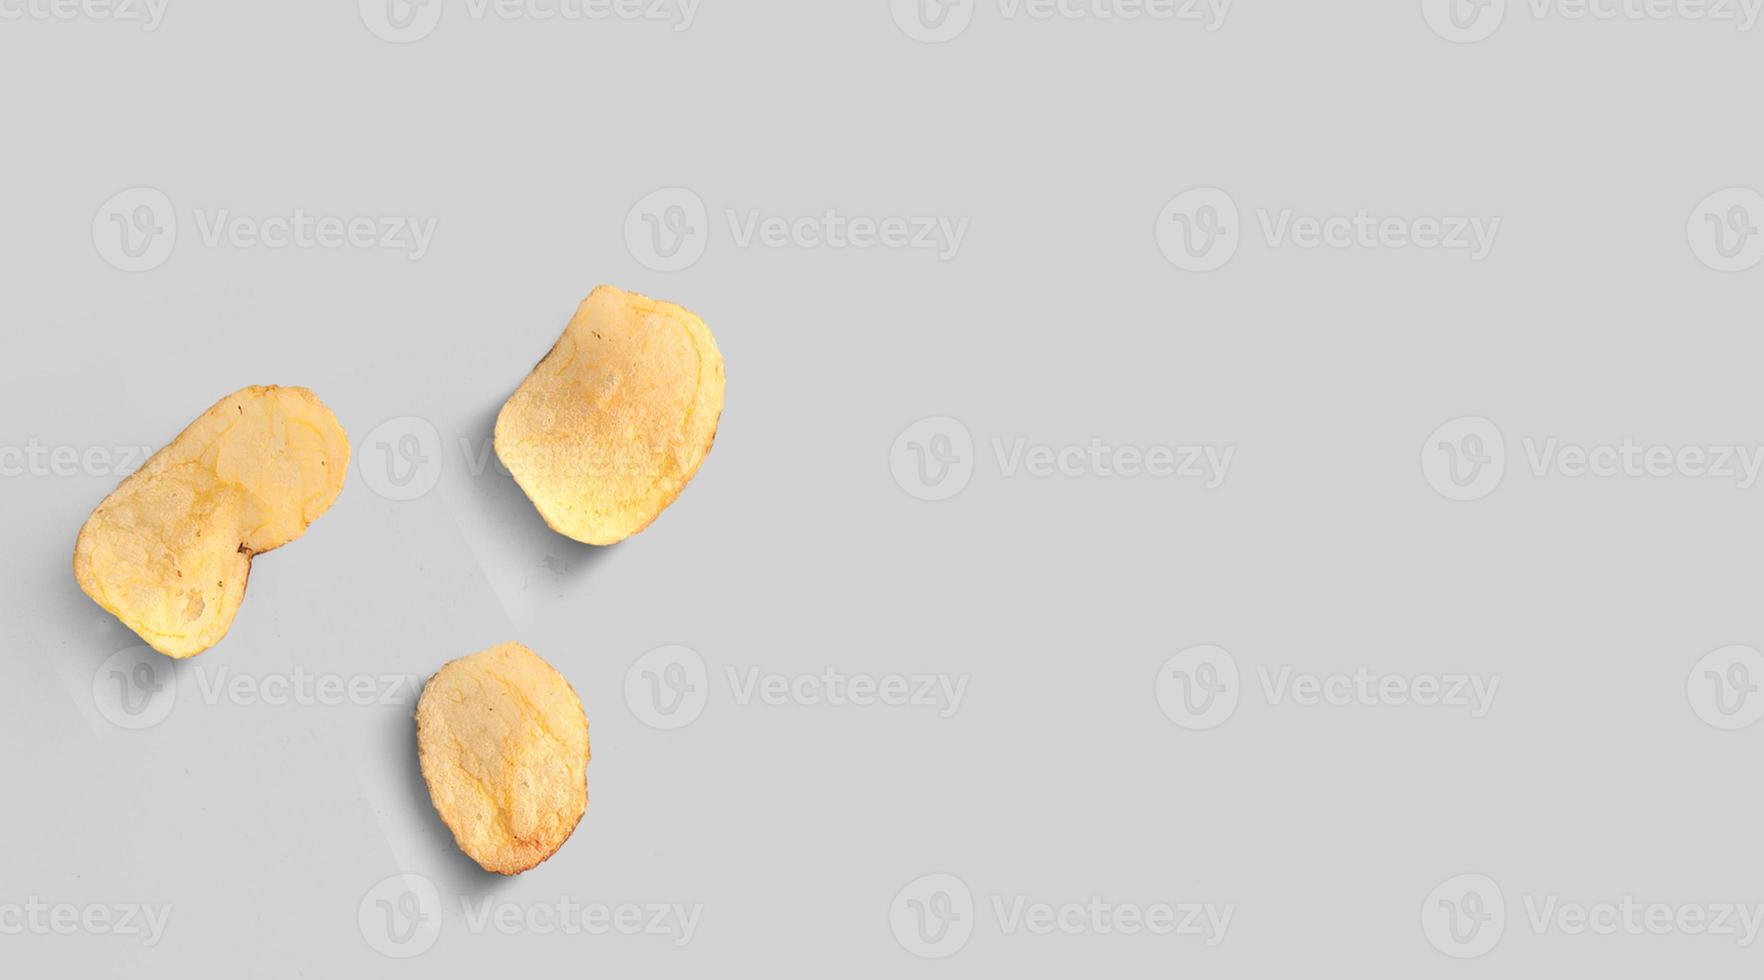 Potato chips isolated on grey background close-up. Top view. Flat lay photo